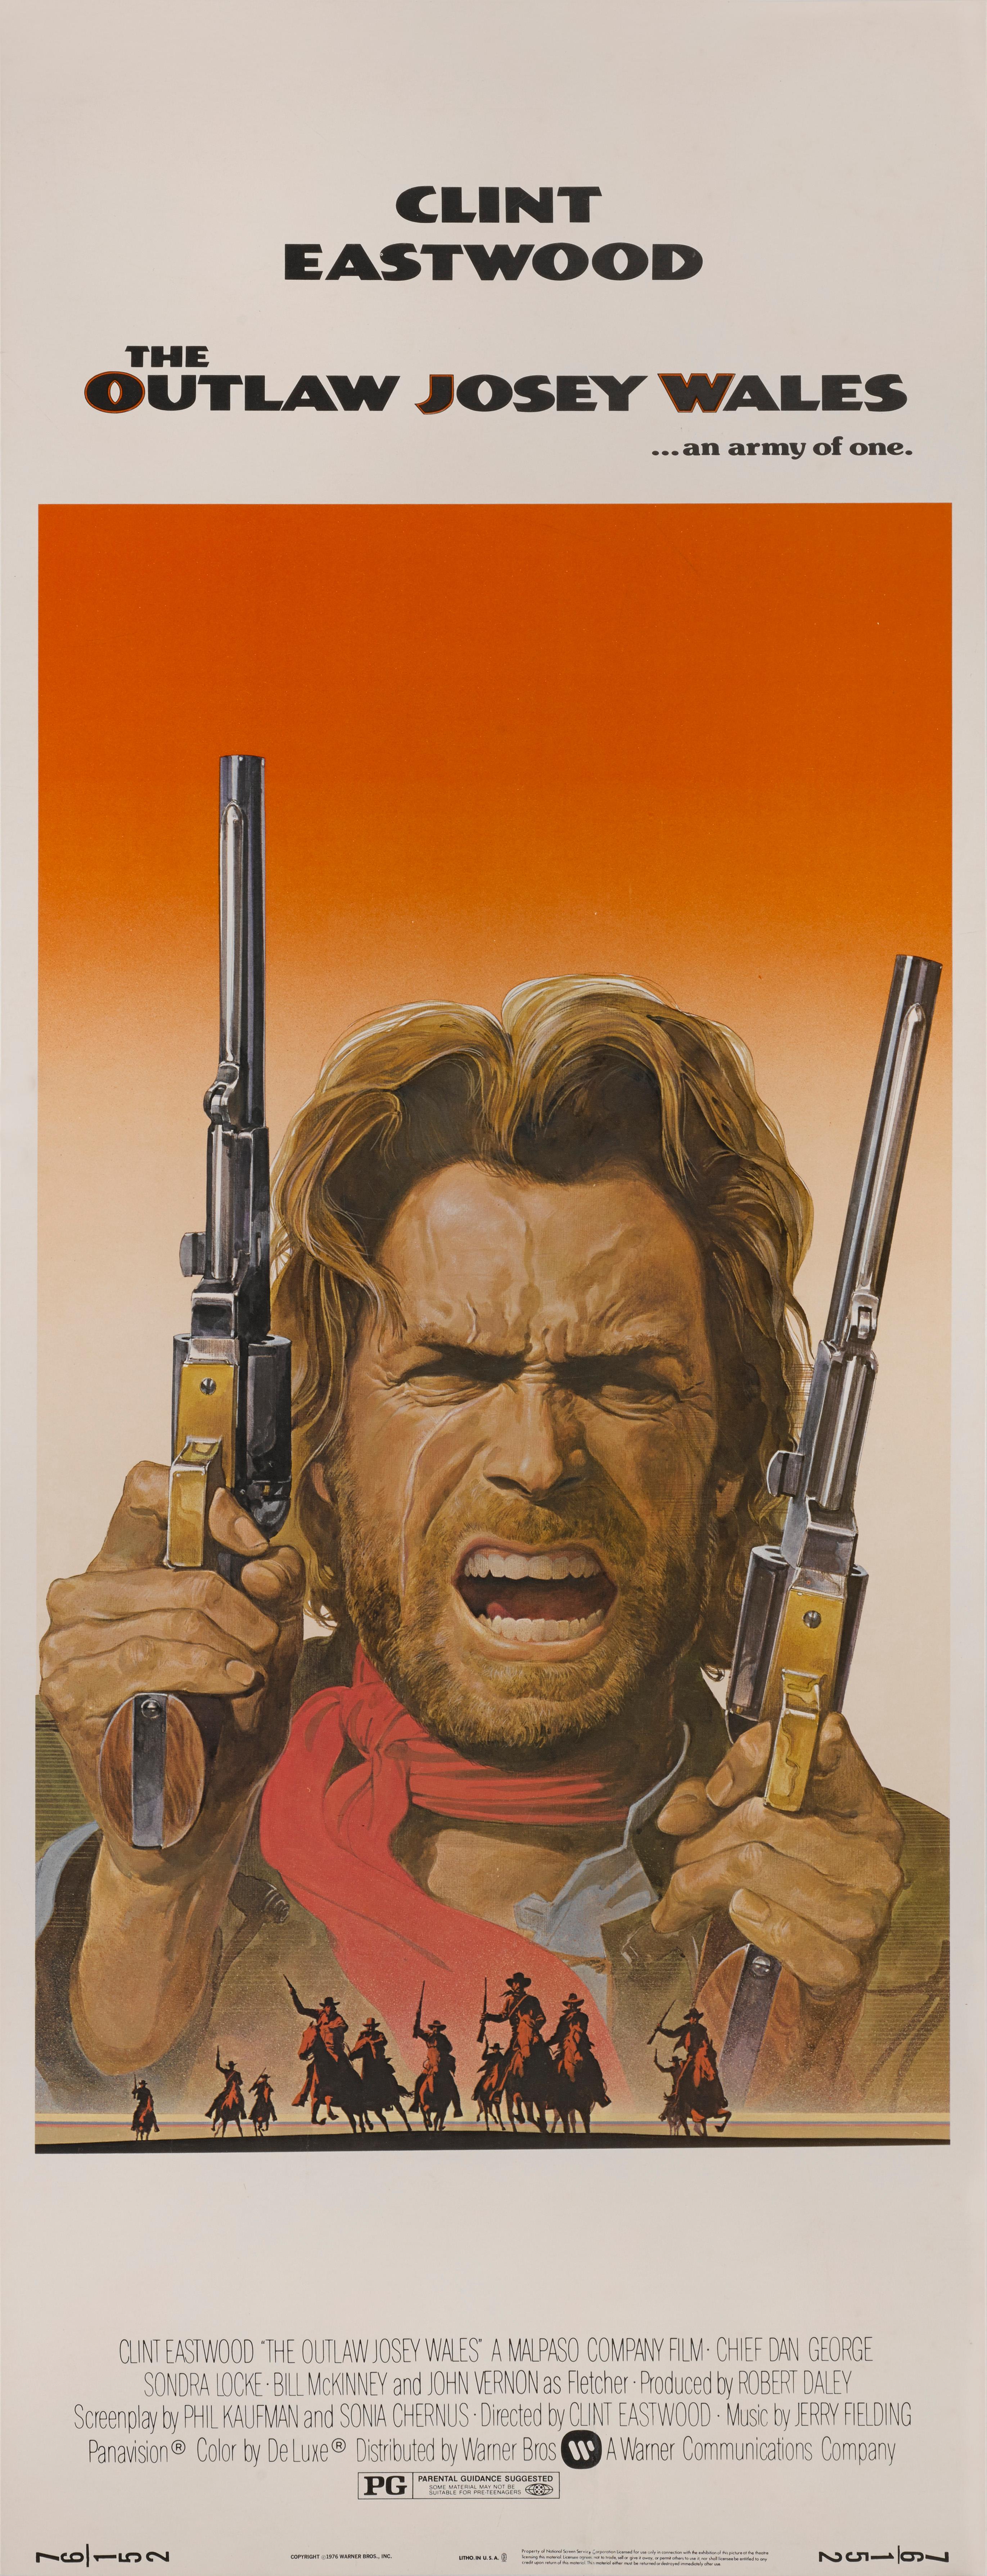 Original US film poster for the 1976 Western The Outlaw Josey Wales.
Directed and starring Clint Eastwood, this western set during and after the American Civil War, is one of the greatest in the genre.
This poster is unfolded and conservation